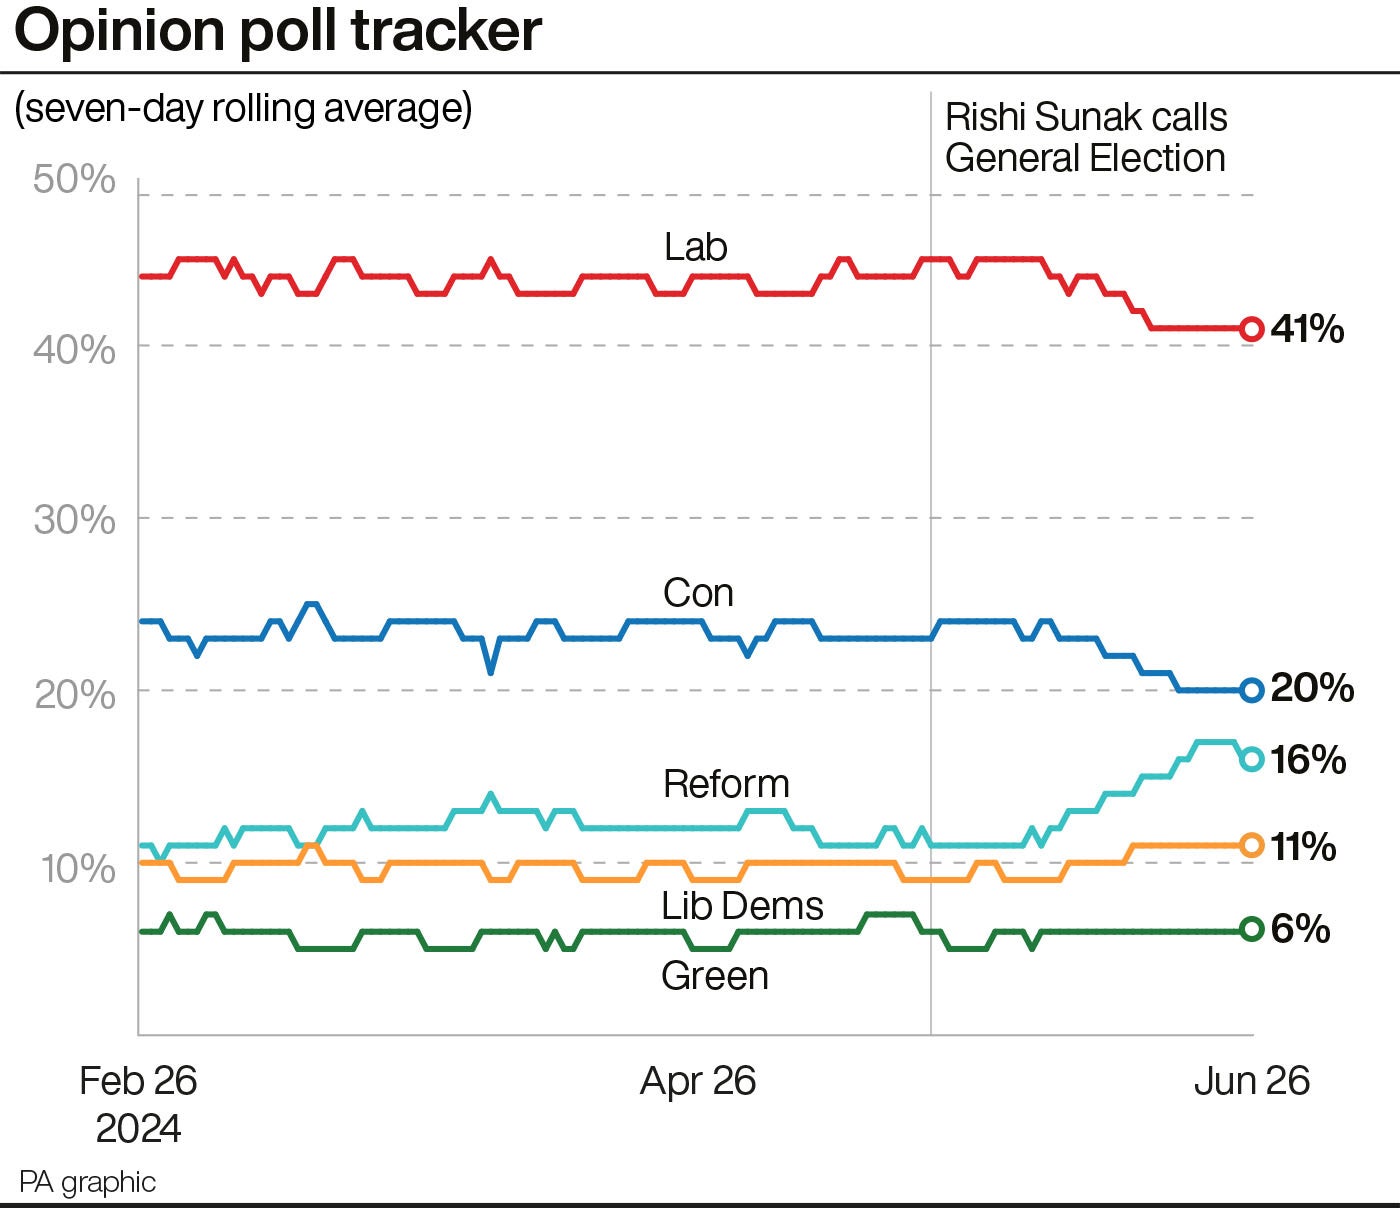 A graph showing the latest opinion poll average for the main parties (PA Graphics)